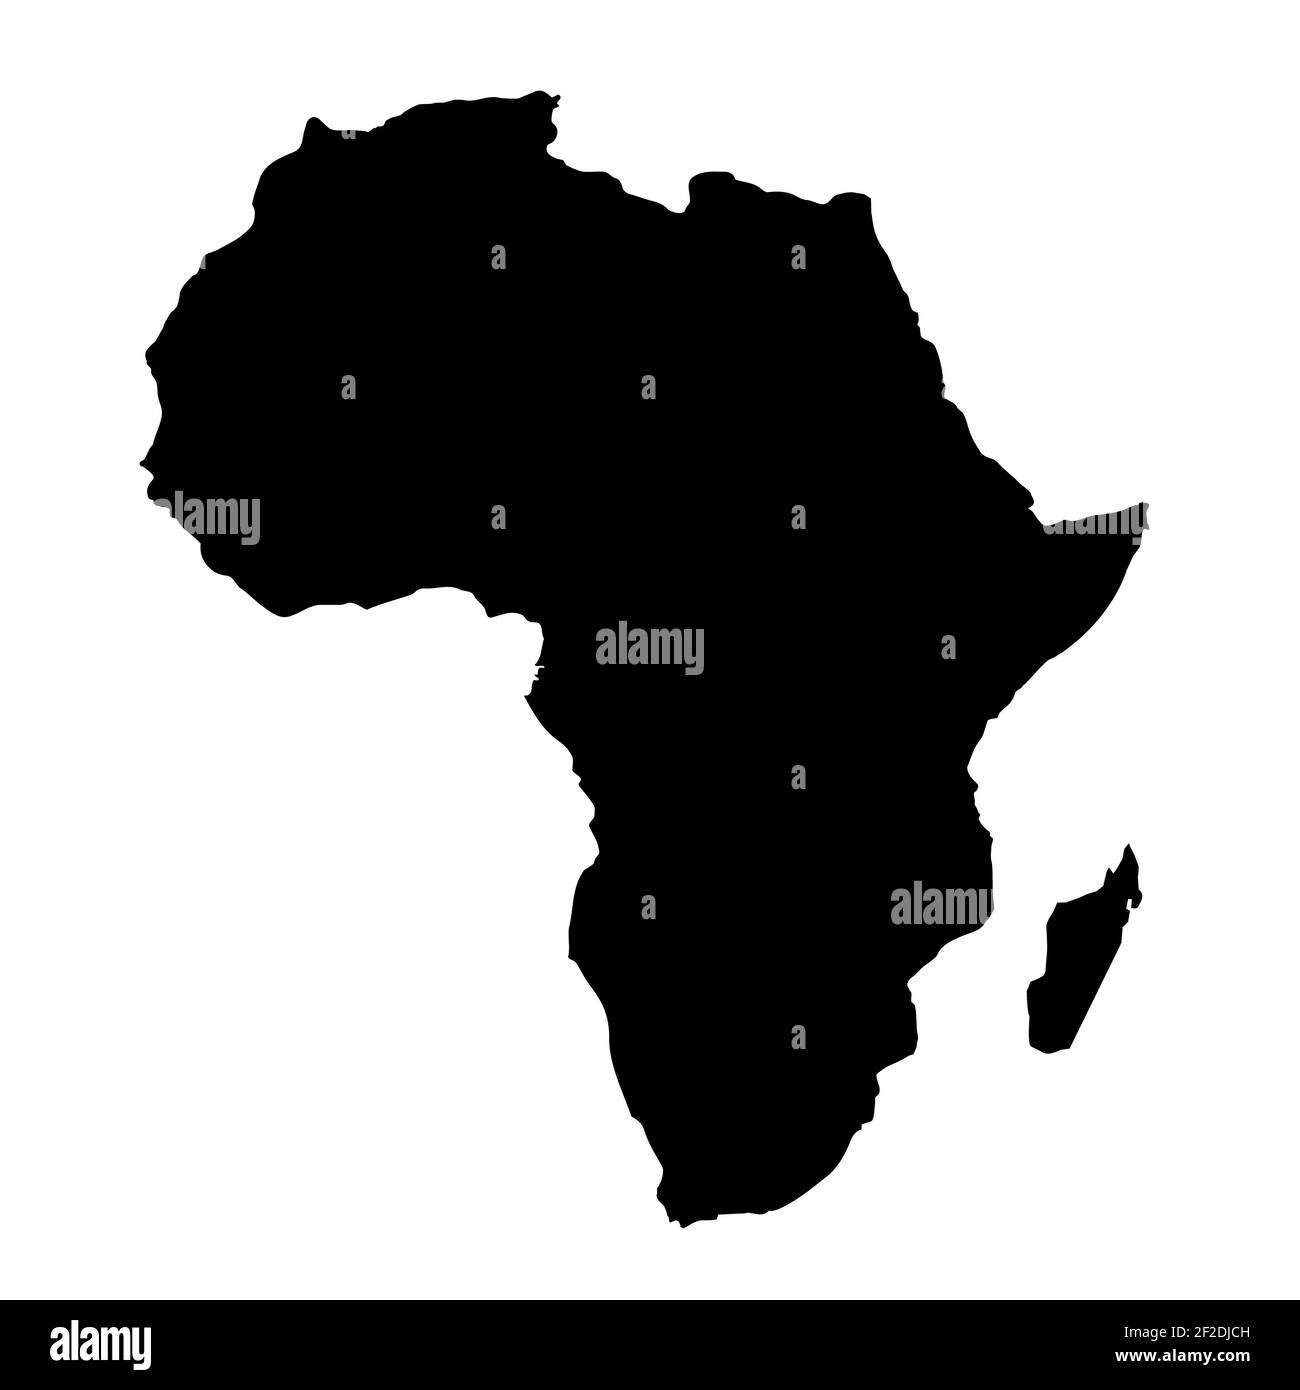 Africa map icon on white background. Africa map silhouette sign. flat style. Stock Photo